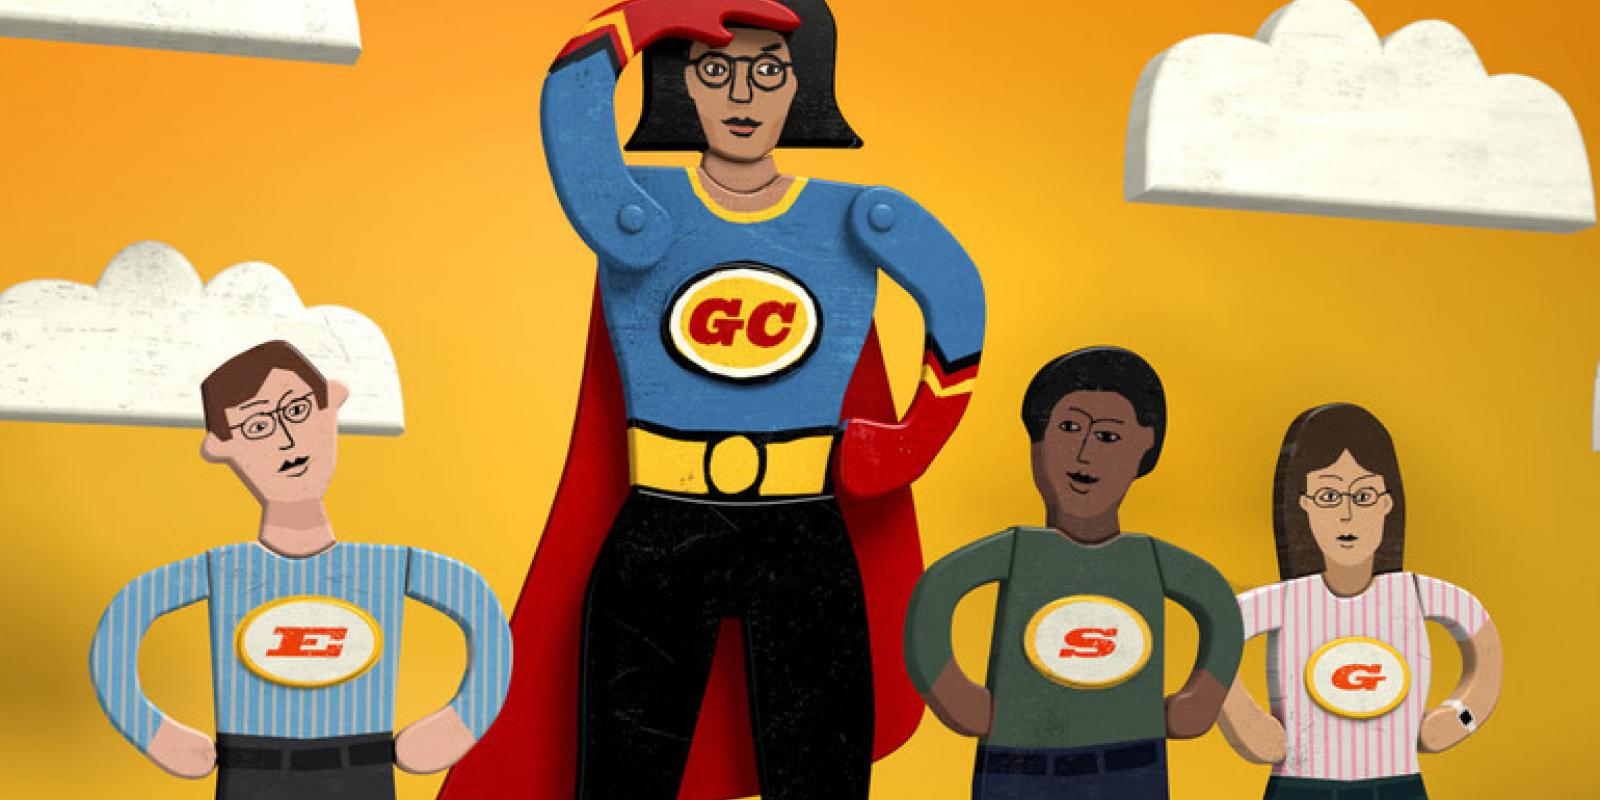 A large super-woman with GC on her chest stands larger that 3 normal people with the letters E, S, and G.